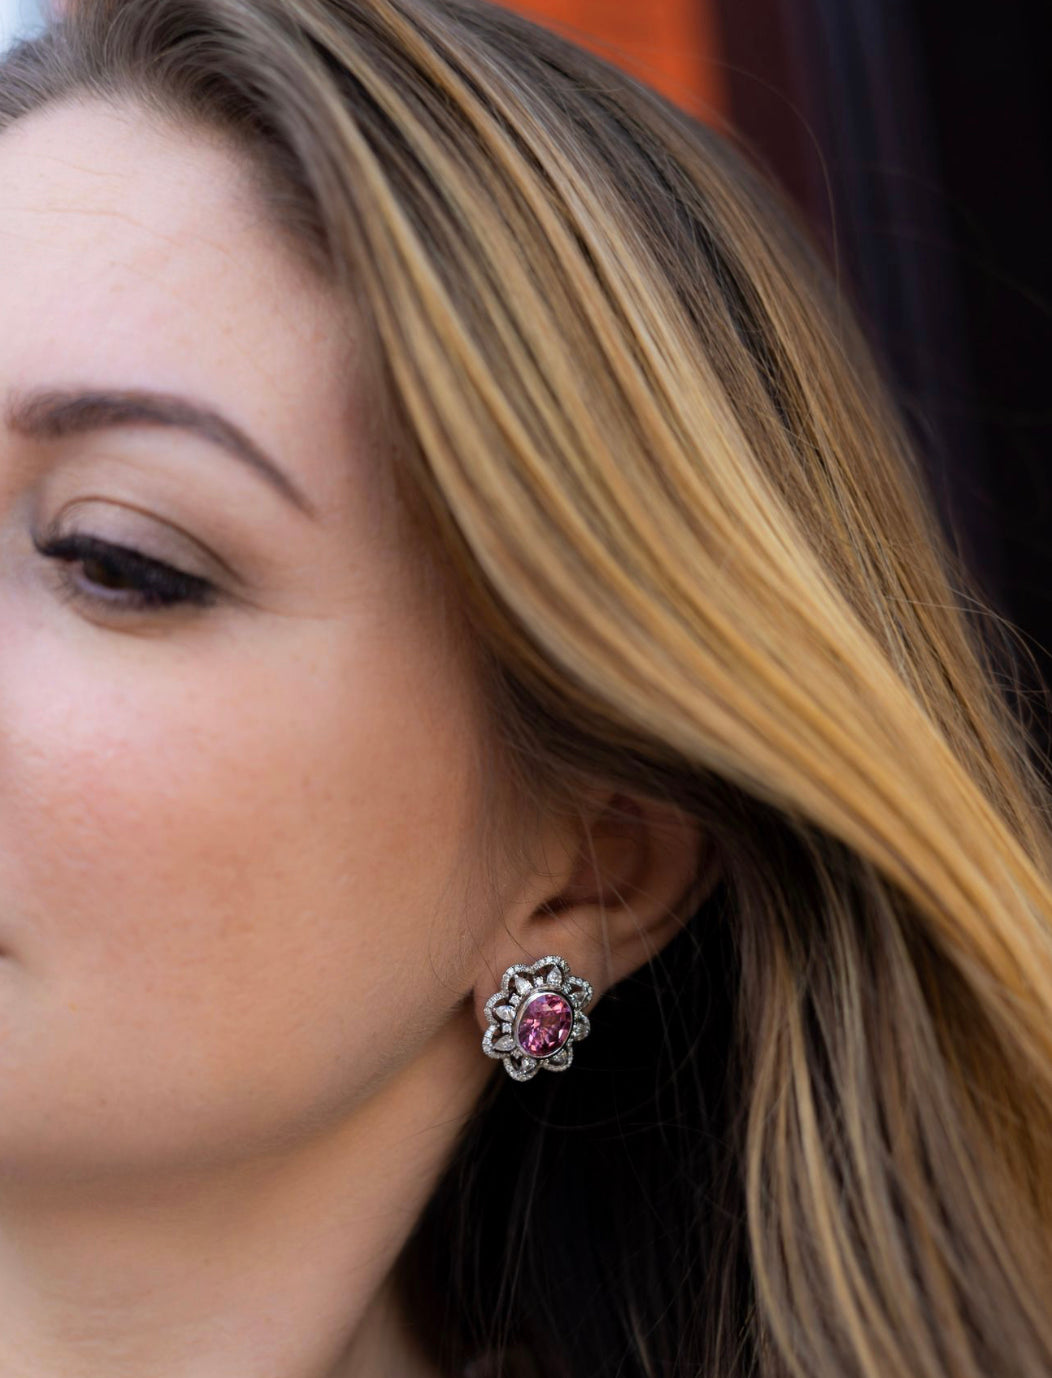 Rare Pink Spinel Earrings